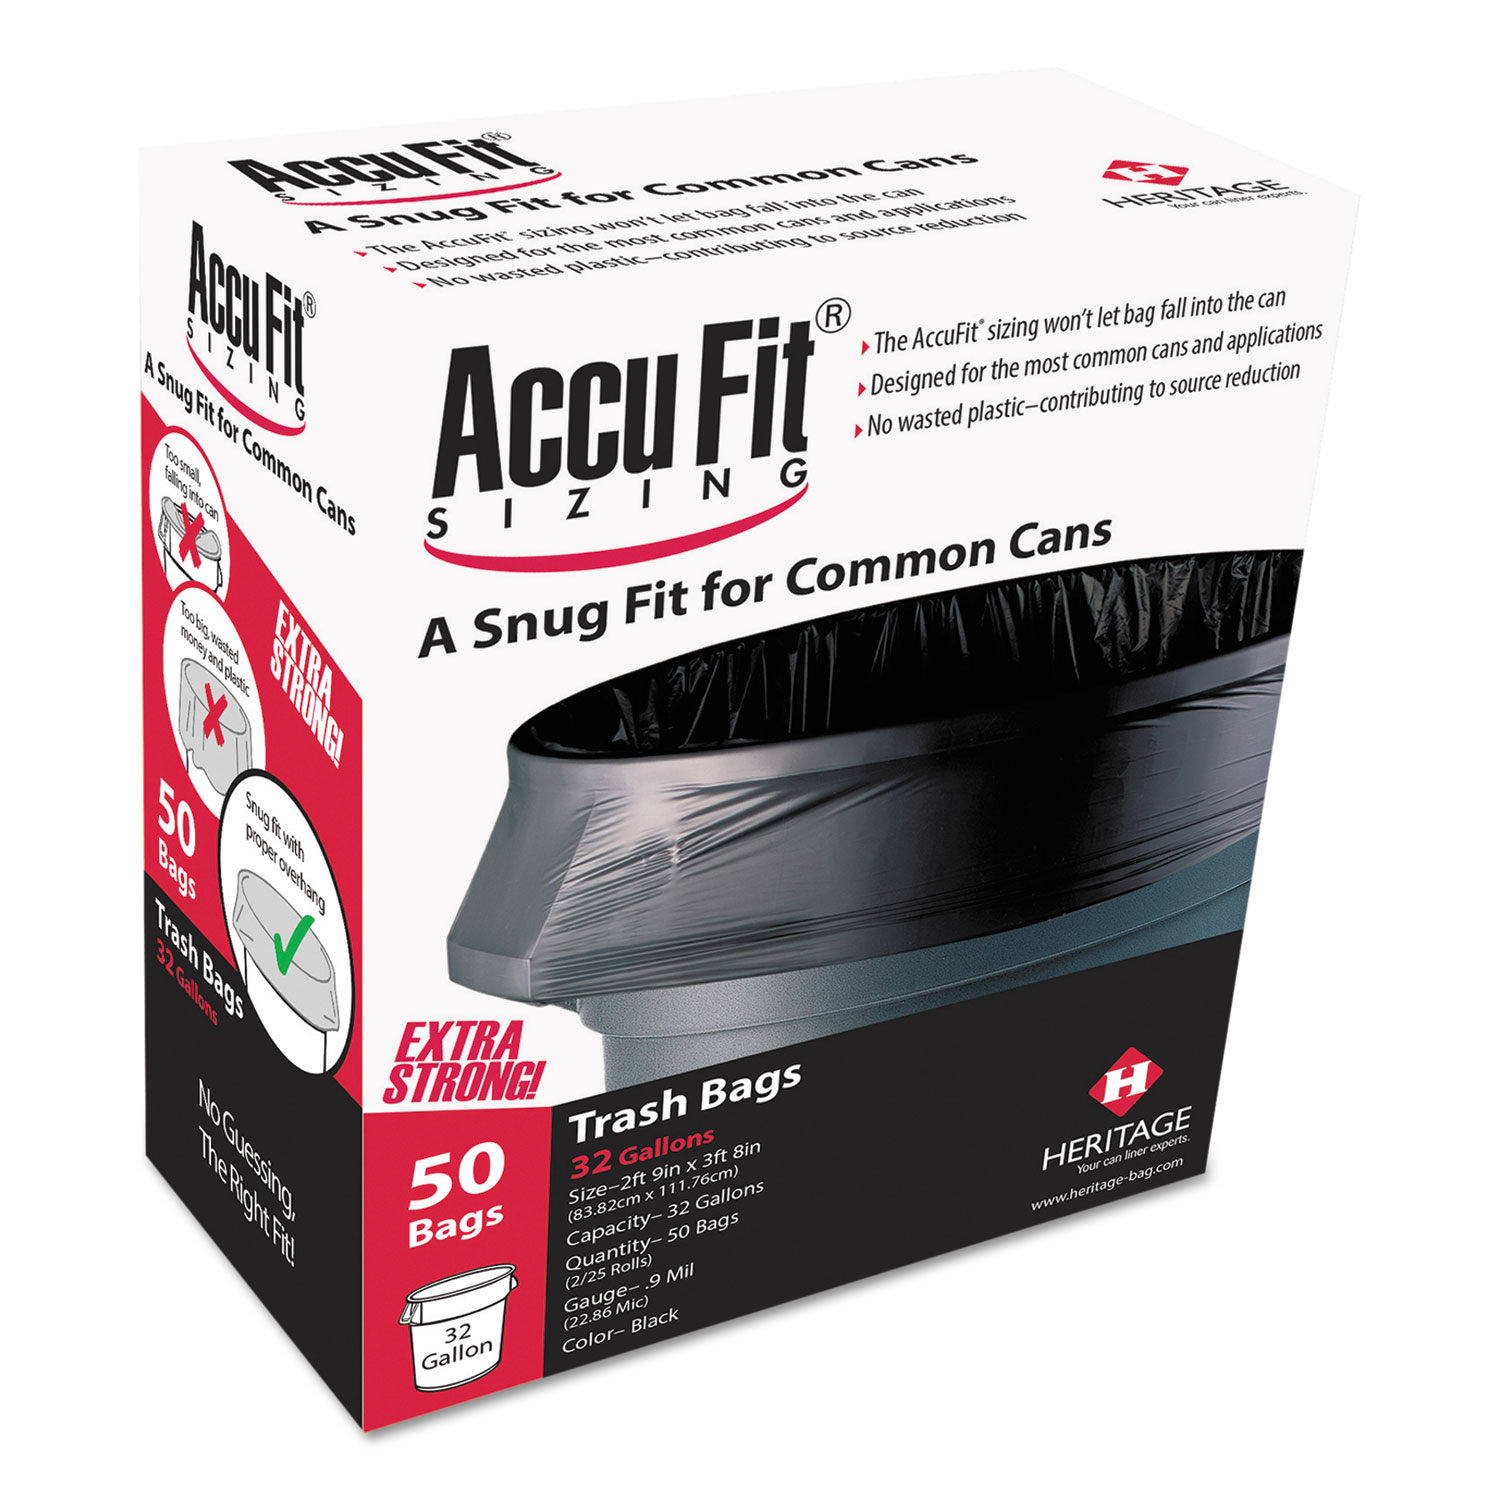  AccuFit H8053PK RC1 Linear Low Density Can Liners with AccuFit Sizing, 55 gal, 1.3 mil, 40 x 53, Black, 50/Box (HERH8053PKRC1) 